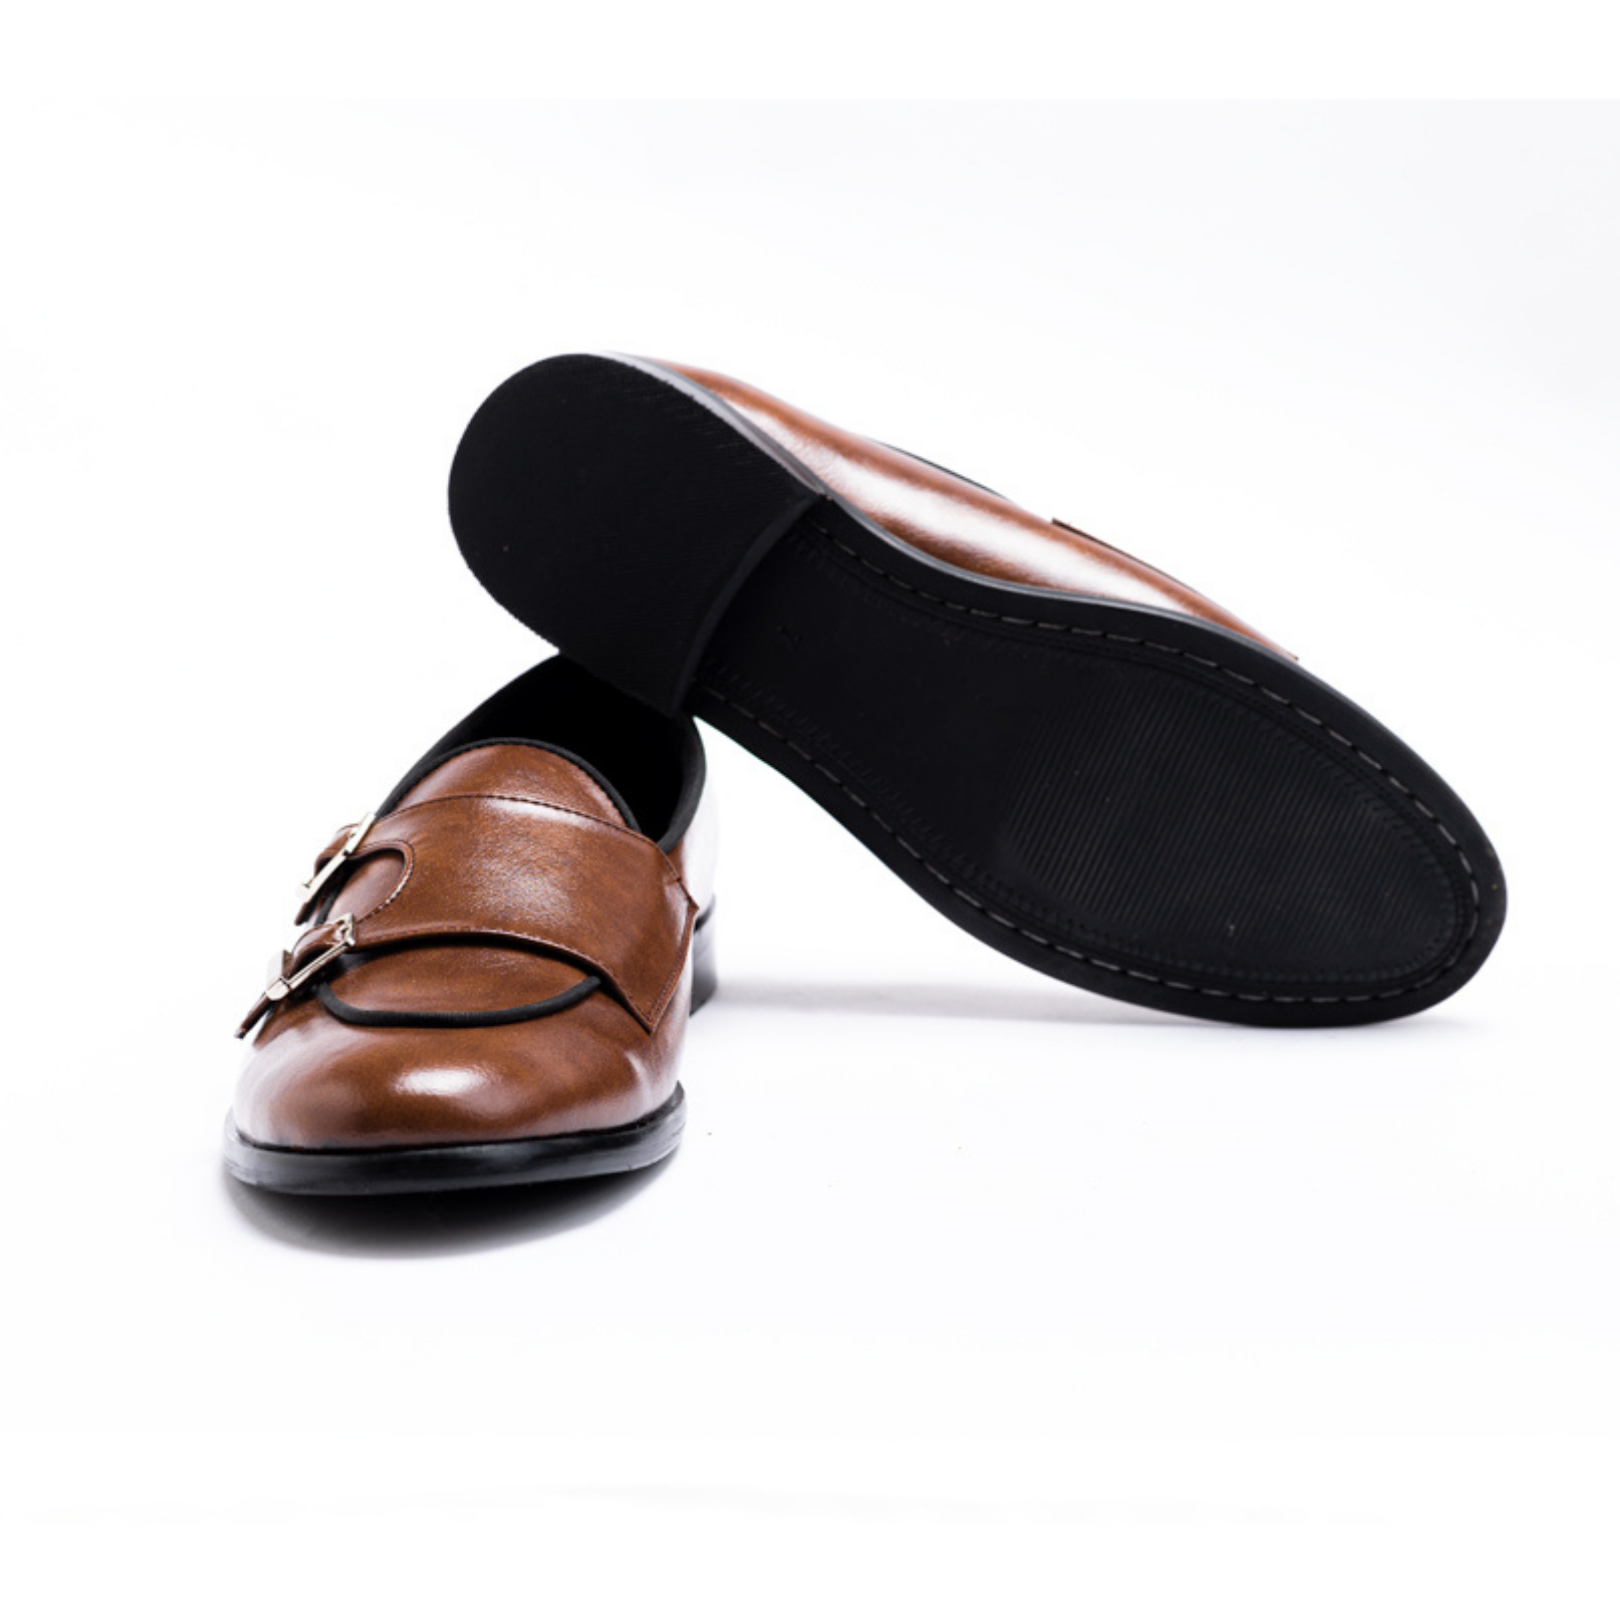 A Luxious 2.0 Classic Double Monk slip-on loafer with two steel buckles by Monkstory.